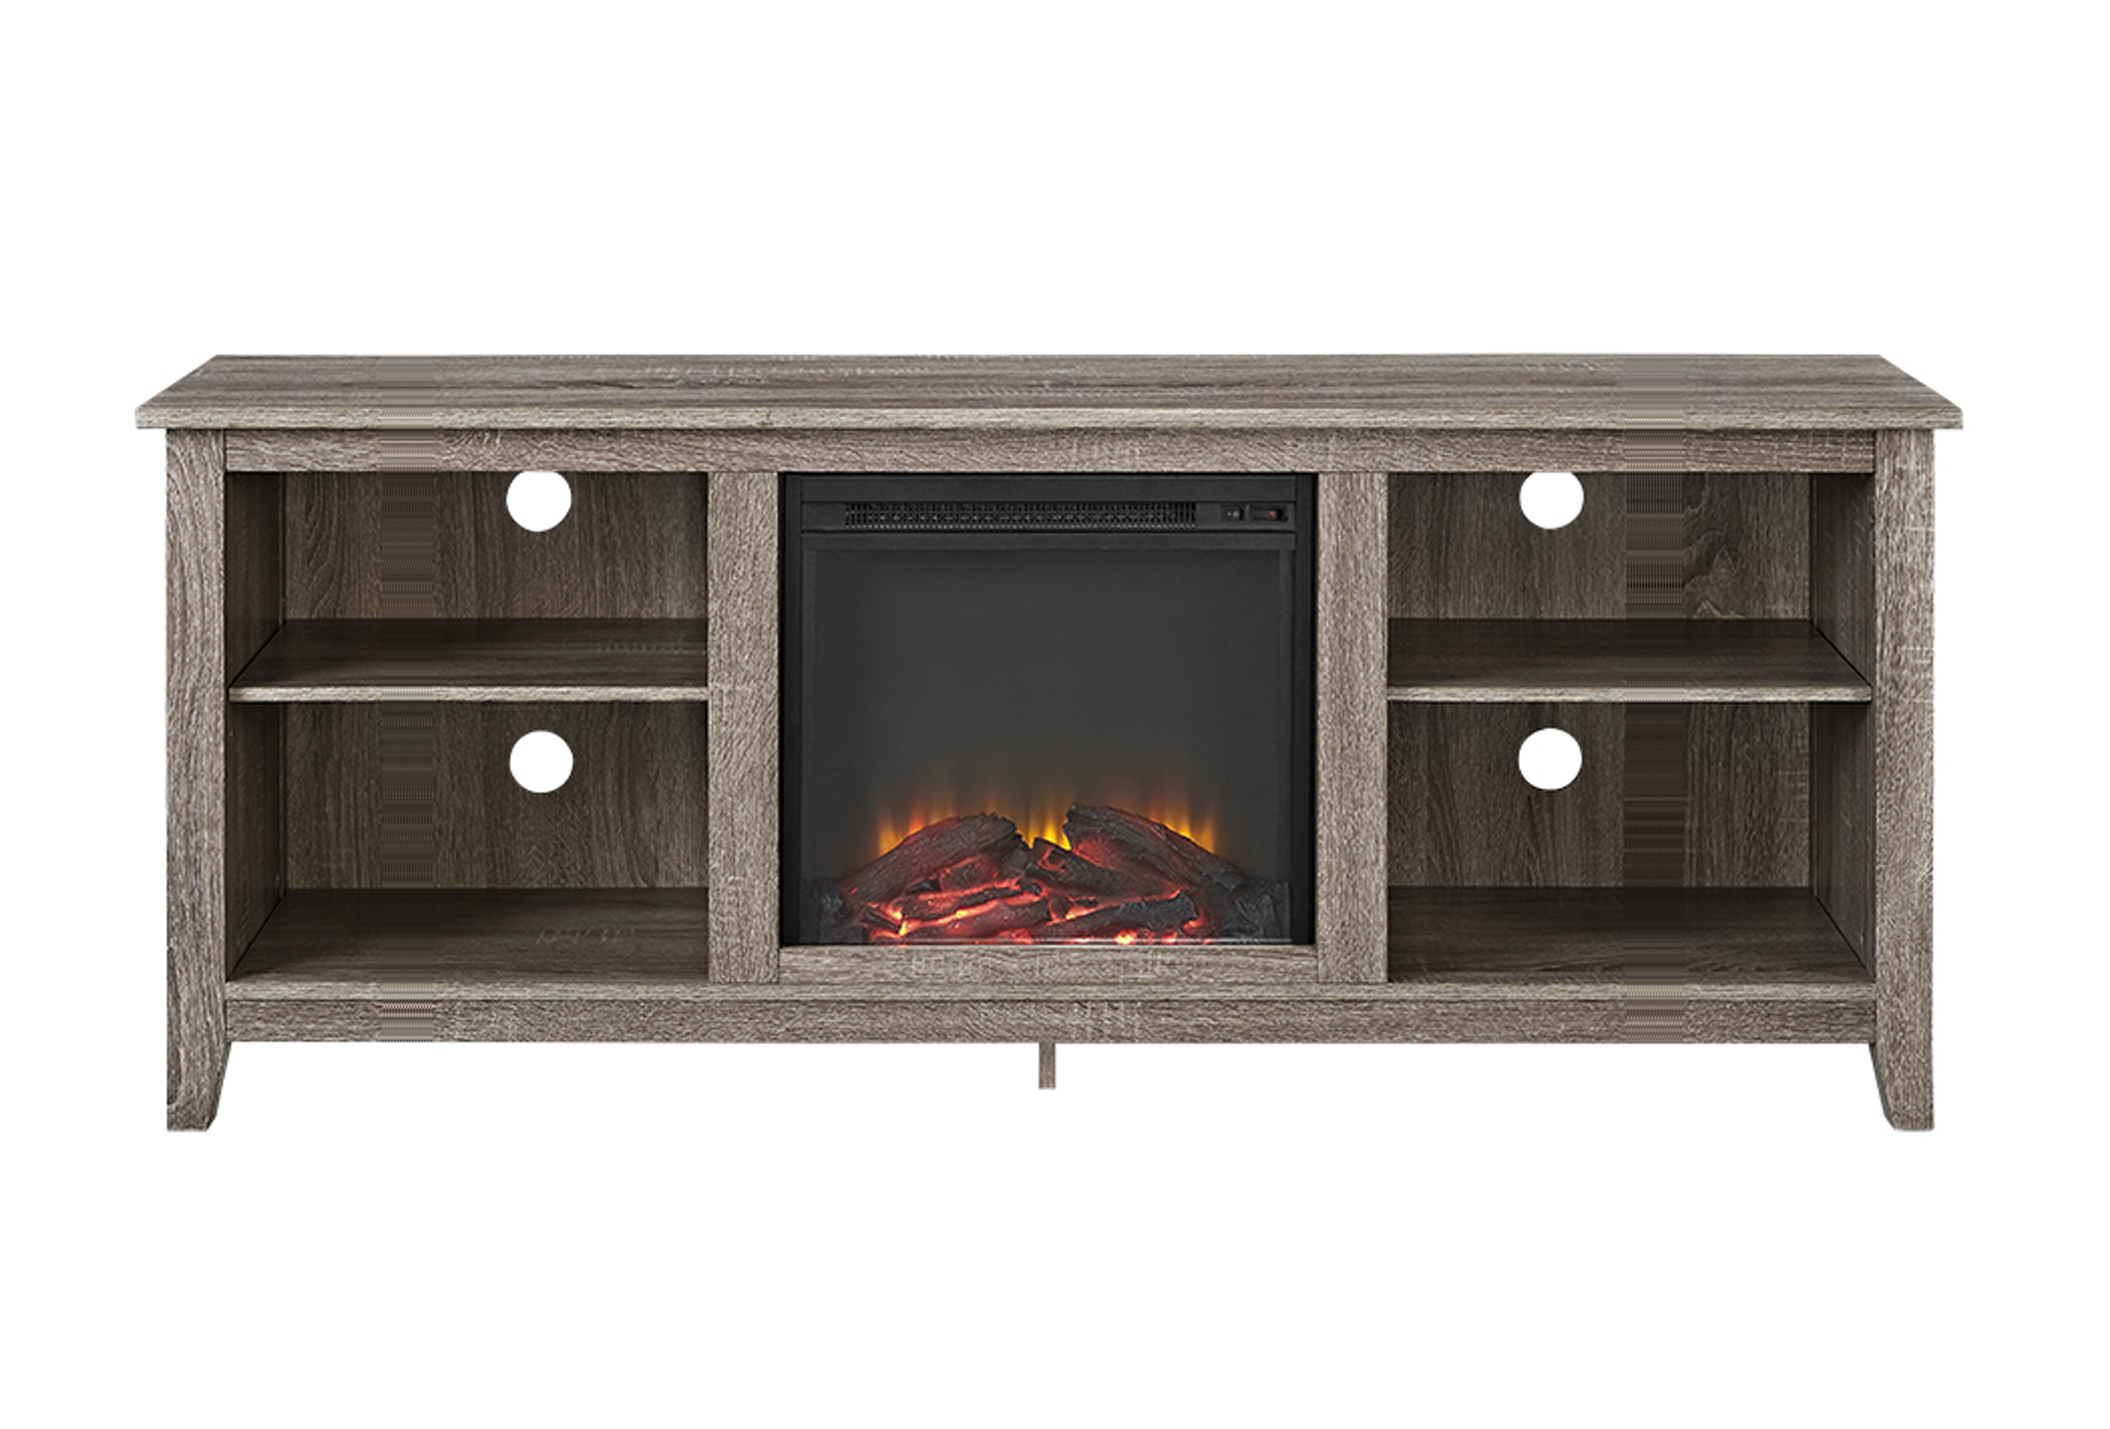 Walker Edison Traditional Fireplace TV Stand for TVs Up to 64", Driftwood - image 7 of 9